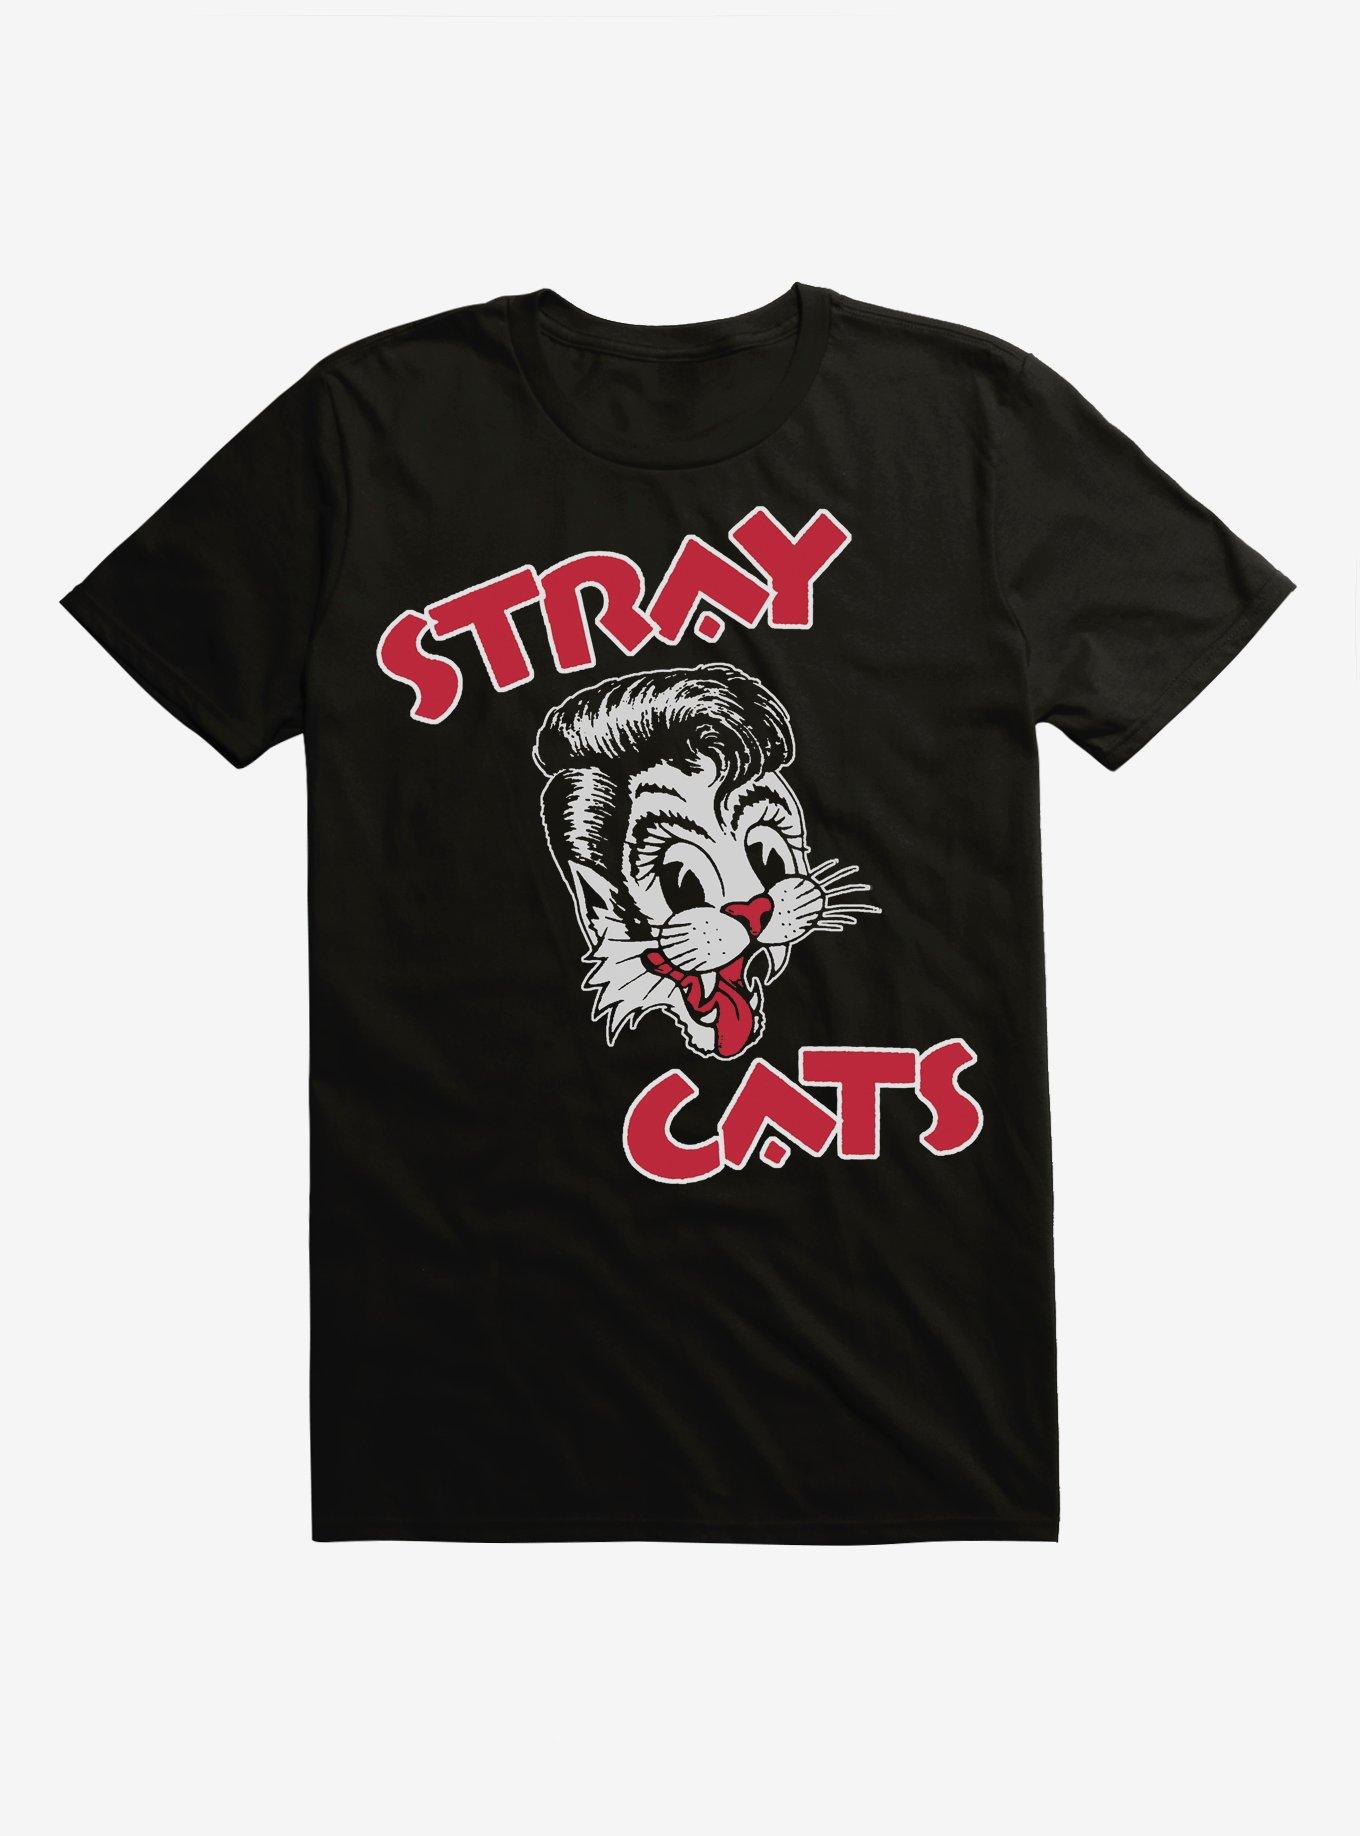 Stray Review - Bucket Hats, Puffer Jackets, And A Brilliant Cat